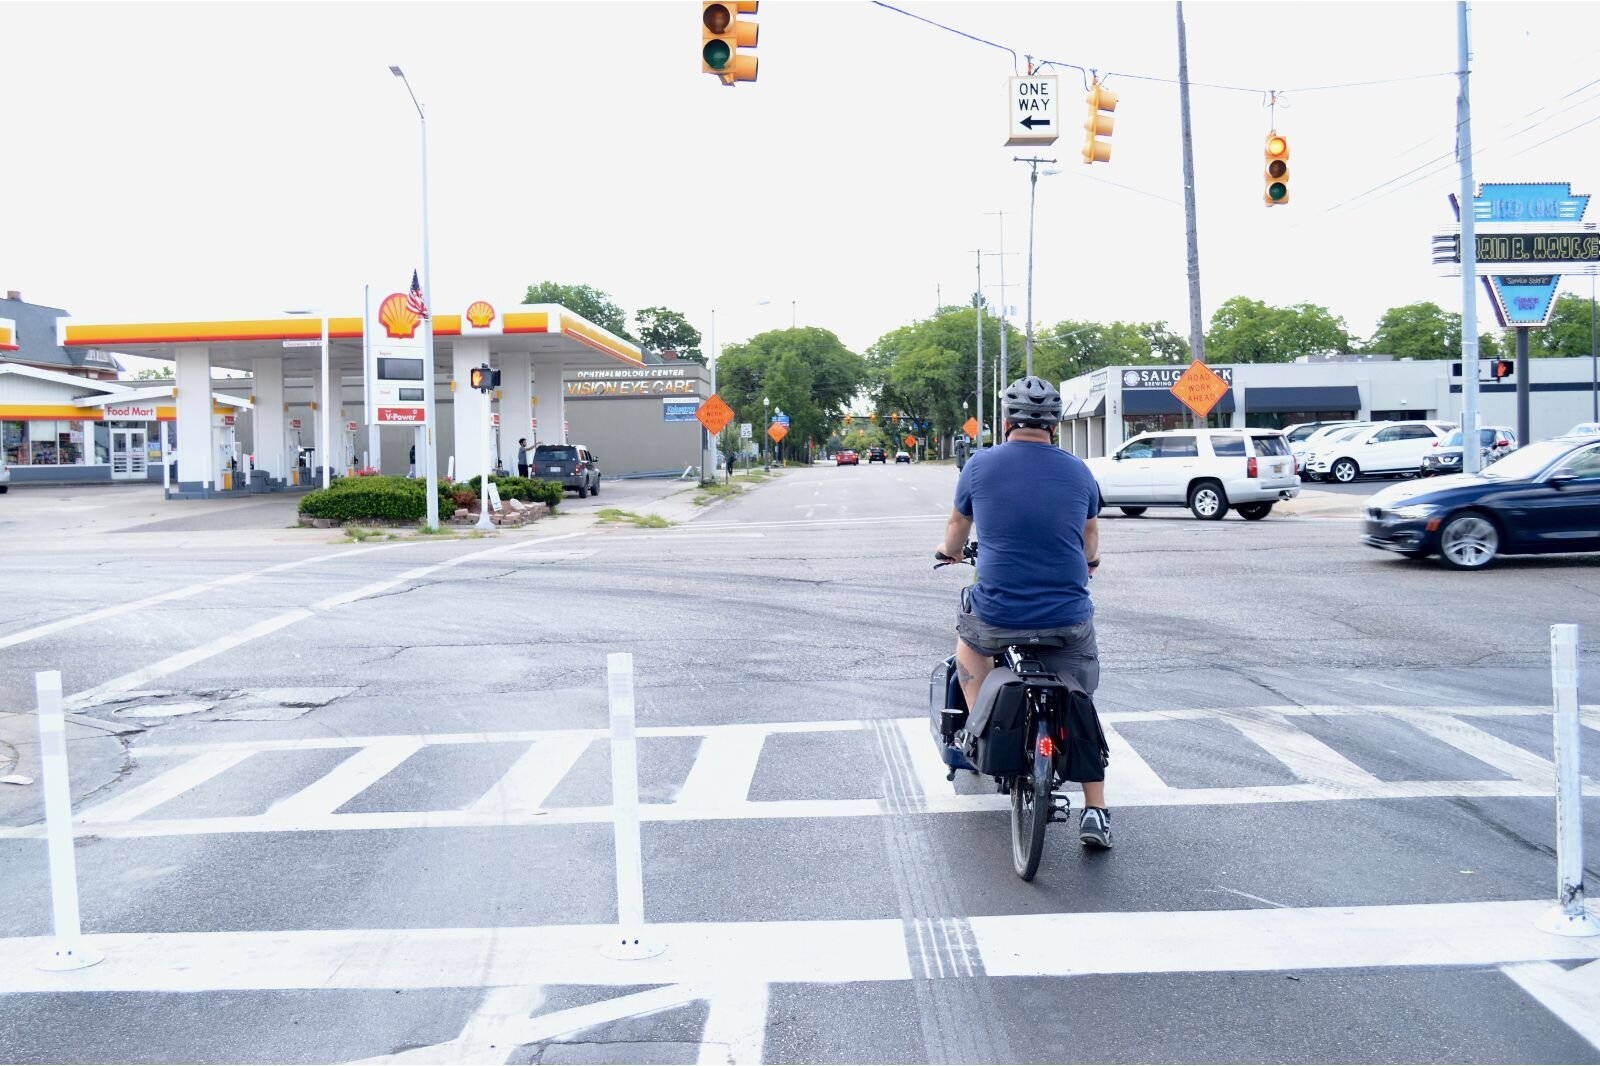 Black notes that at this intersection he should be behind the stop line, but he's in the crosswalk so motorists turning left onto Michigan can see him. "It's just not a good situation," at that intersection, he says.